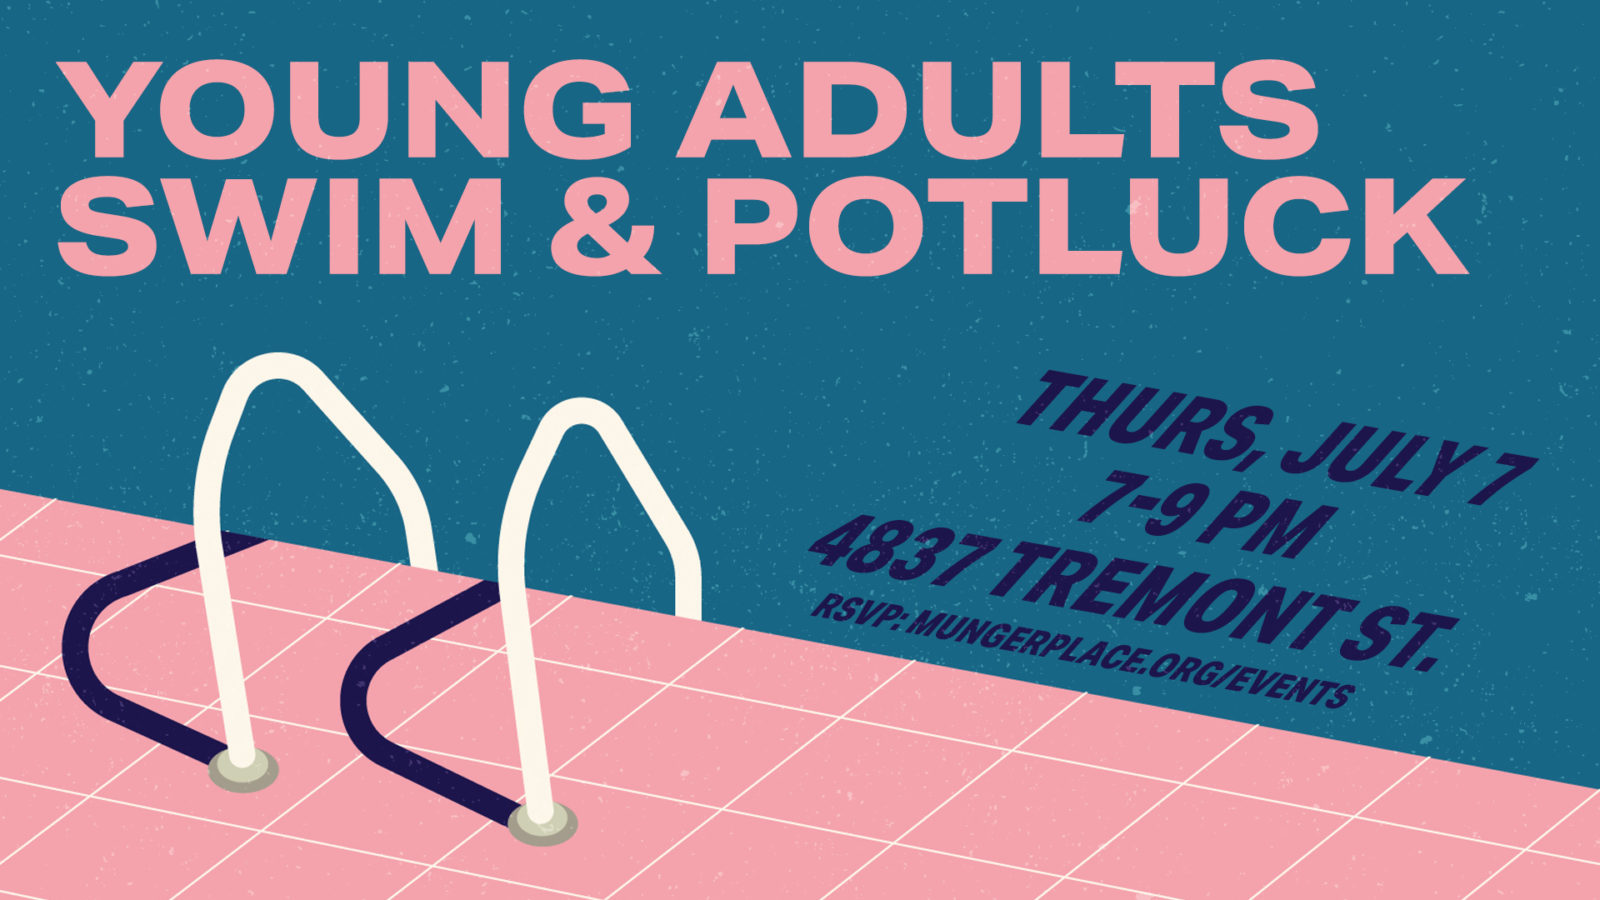 YOUNG ADULTS: SWIM & POTLUCK